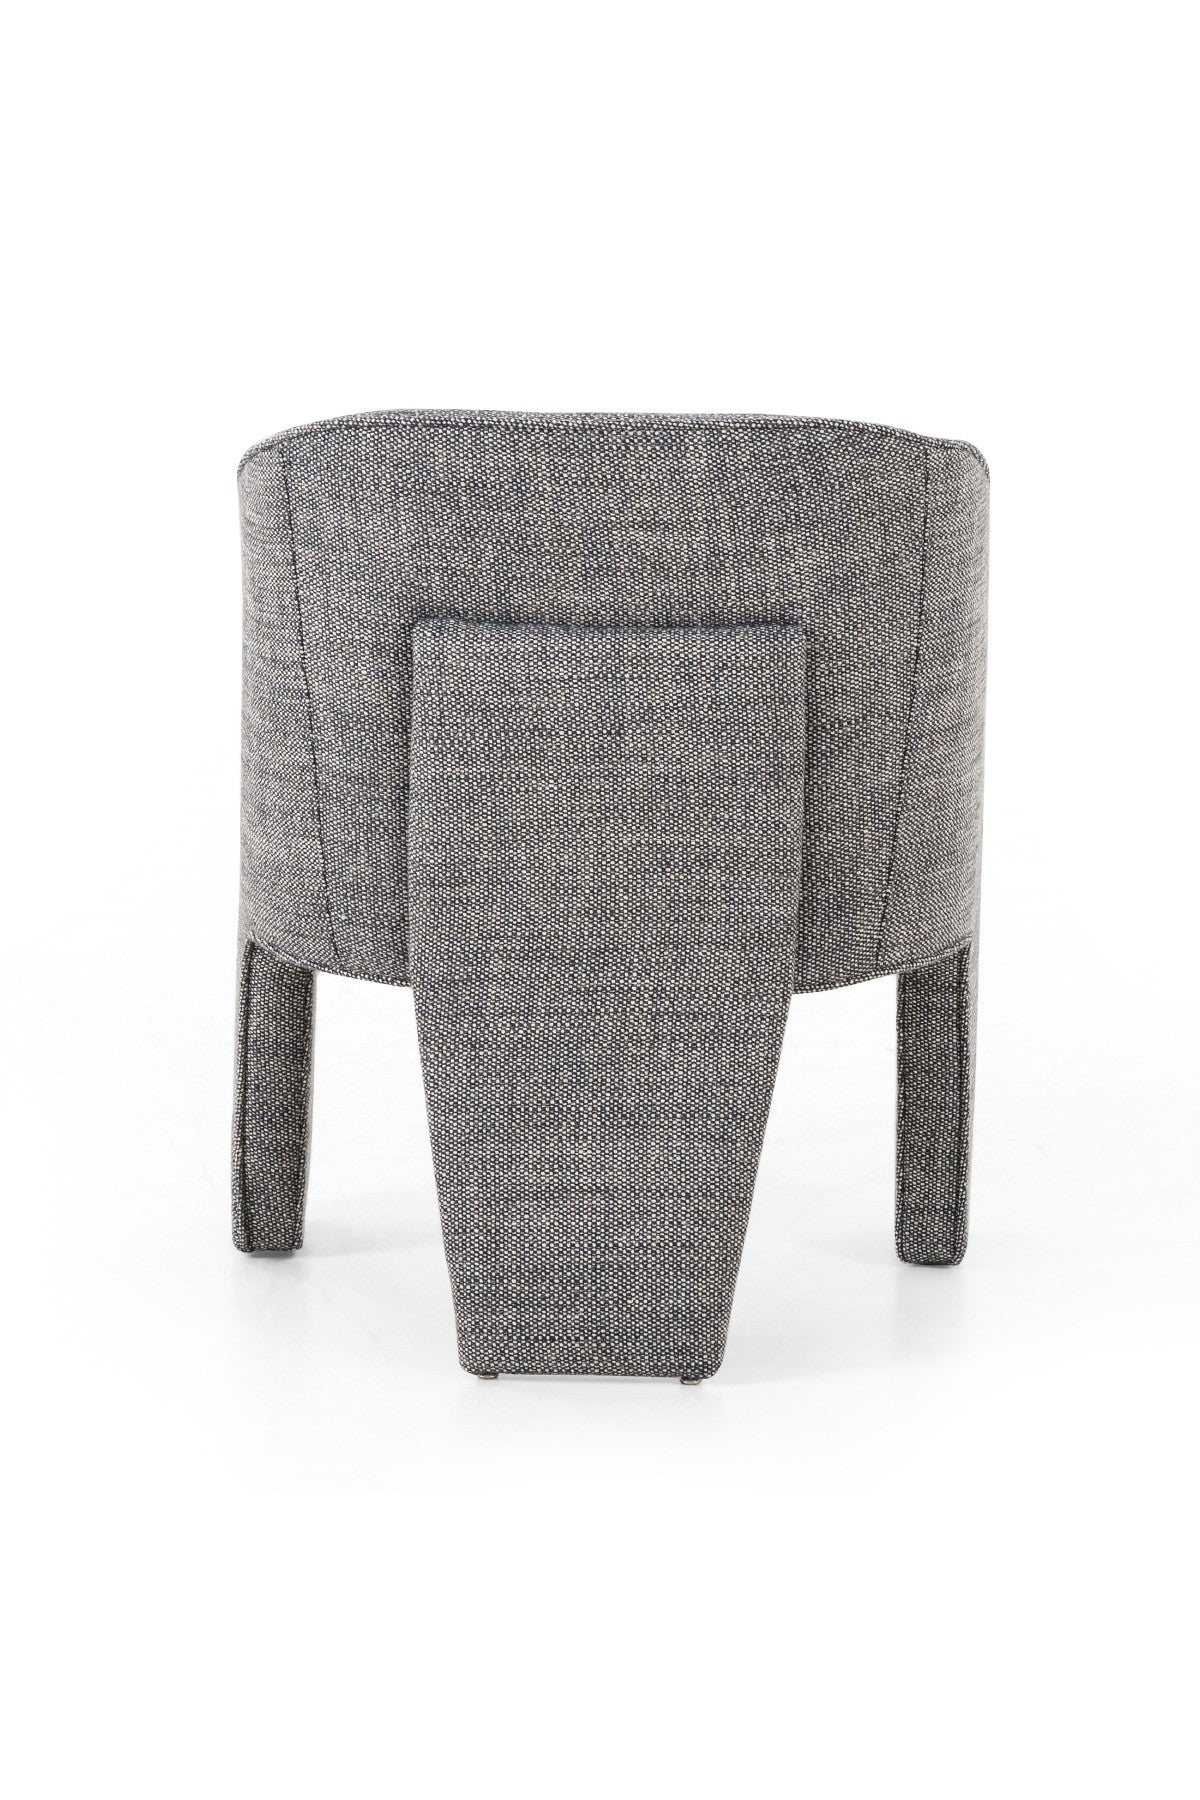 Resno Dining Chair